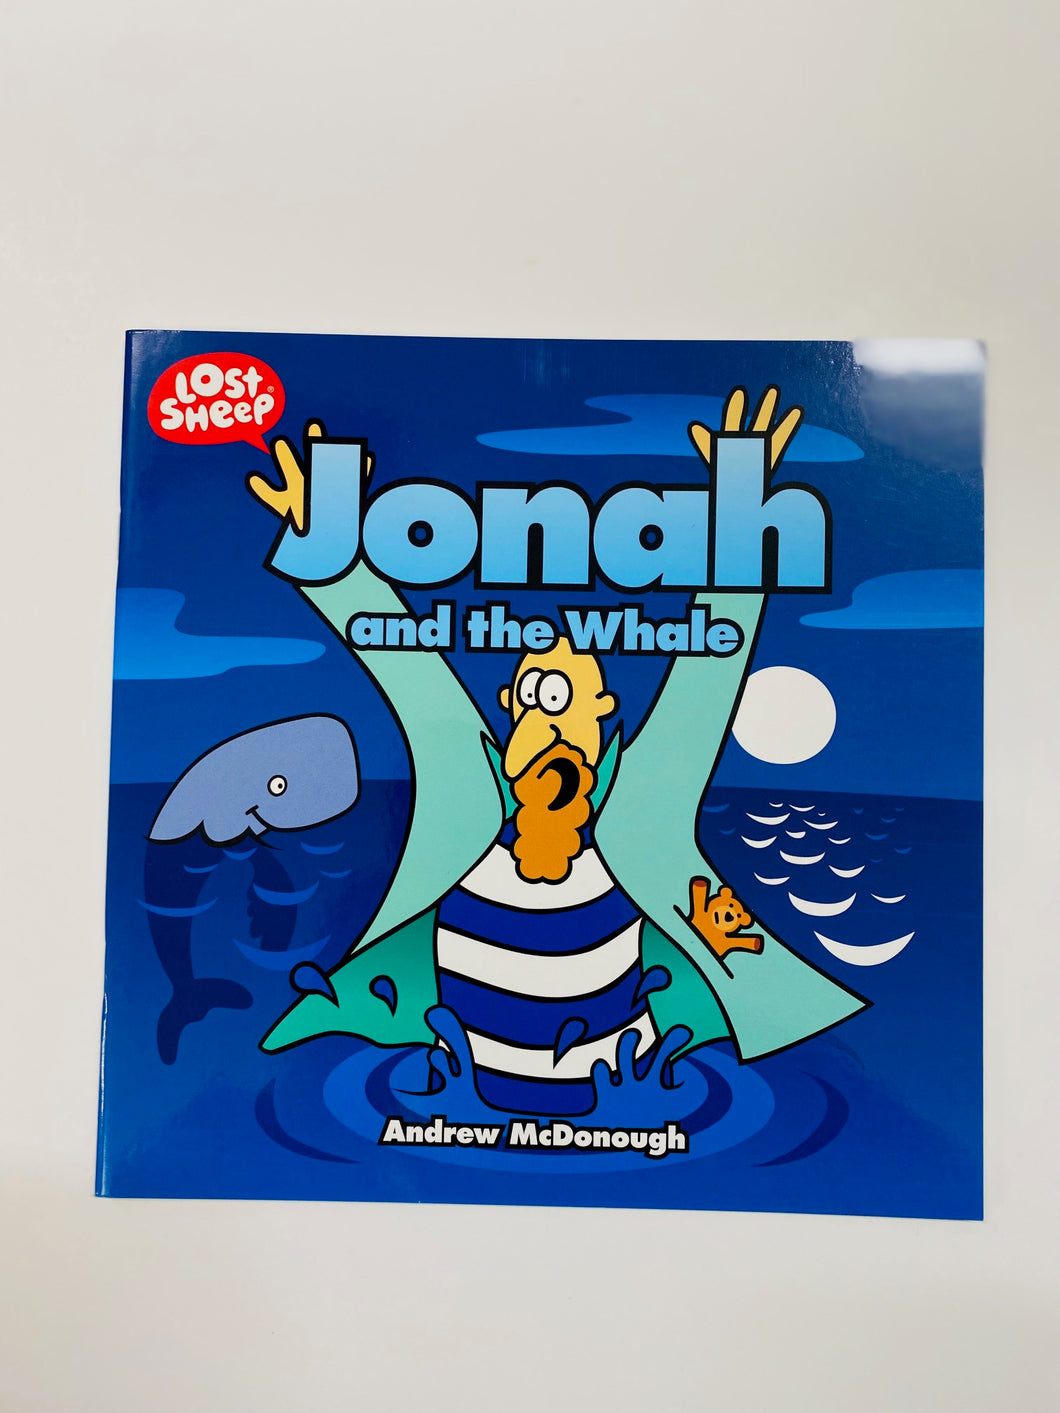 Lost Sheep: Jonah and the Whale